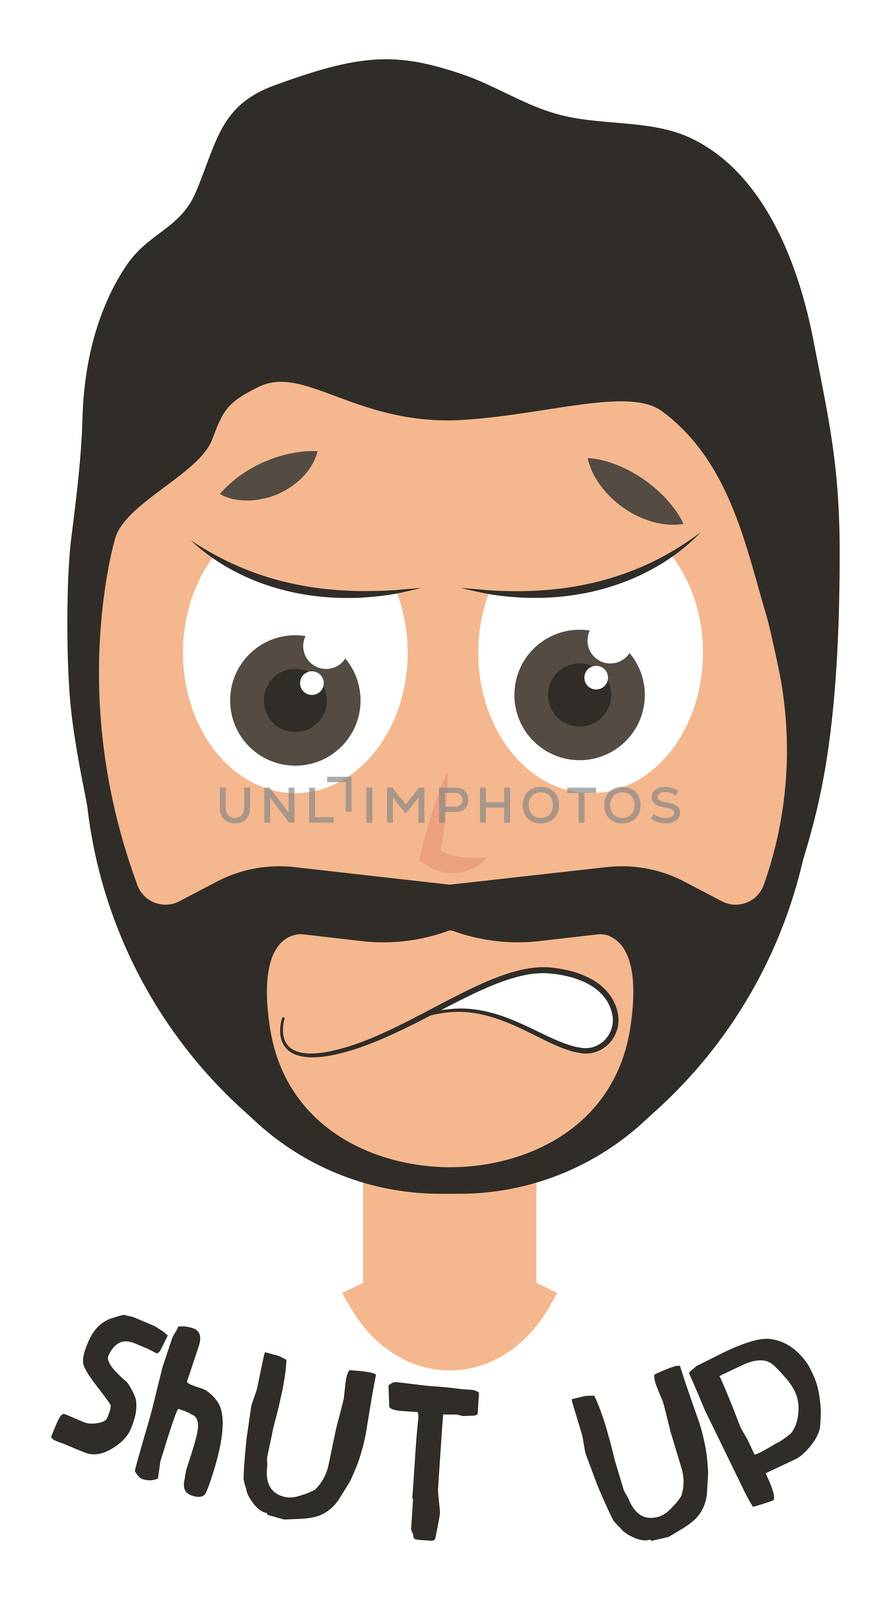 Angry man emoji, illustration, vector on white background by Morphart